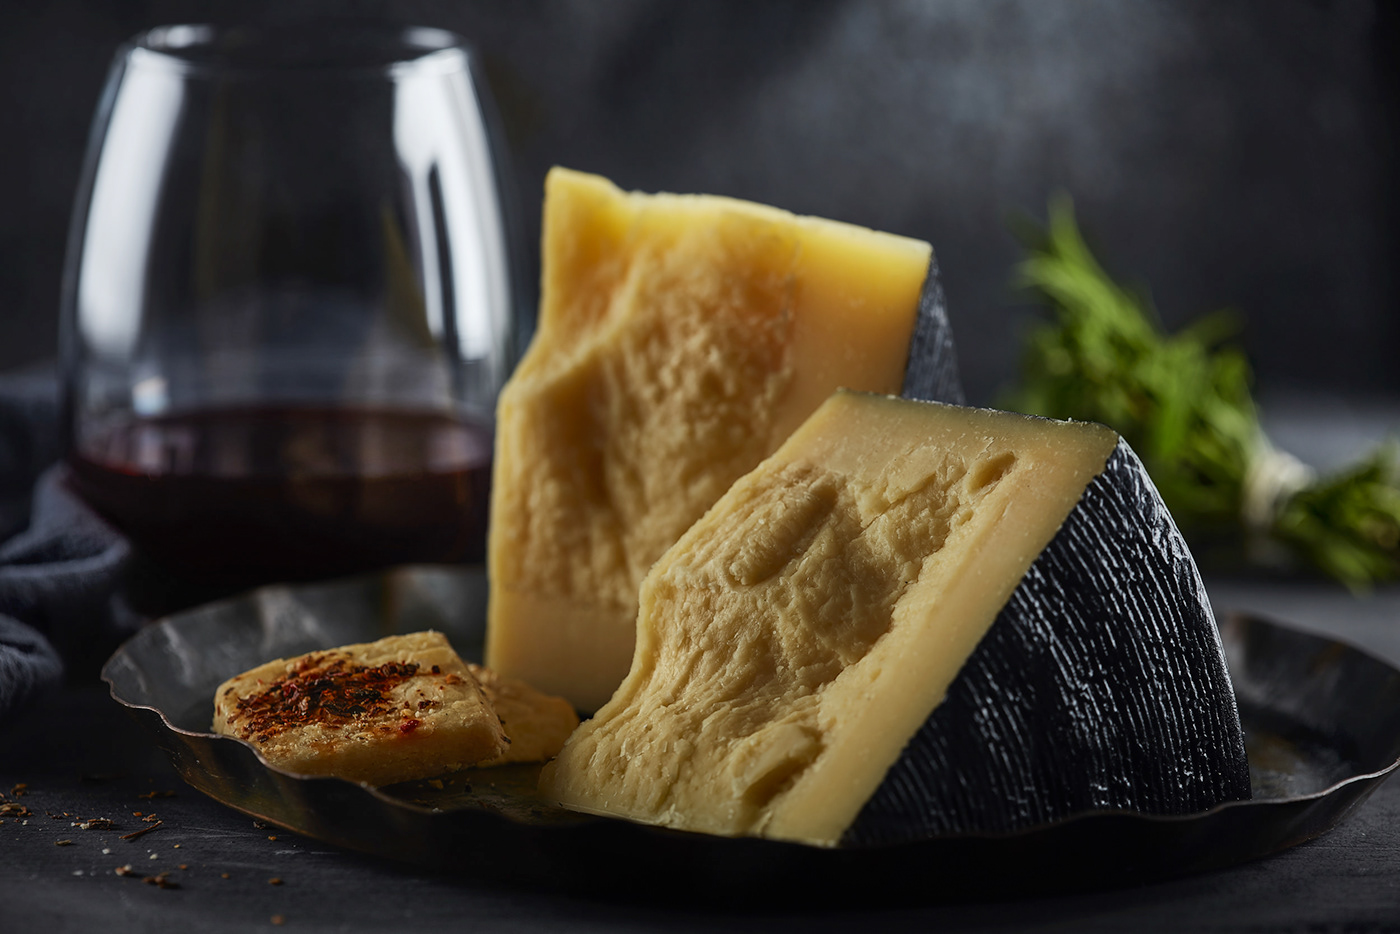 Cheese tasty gourmet recipe food photography photographer art direction  Food  food styling props